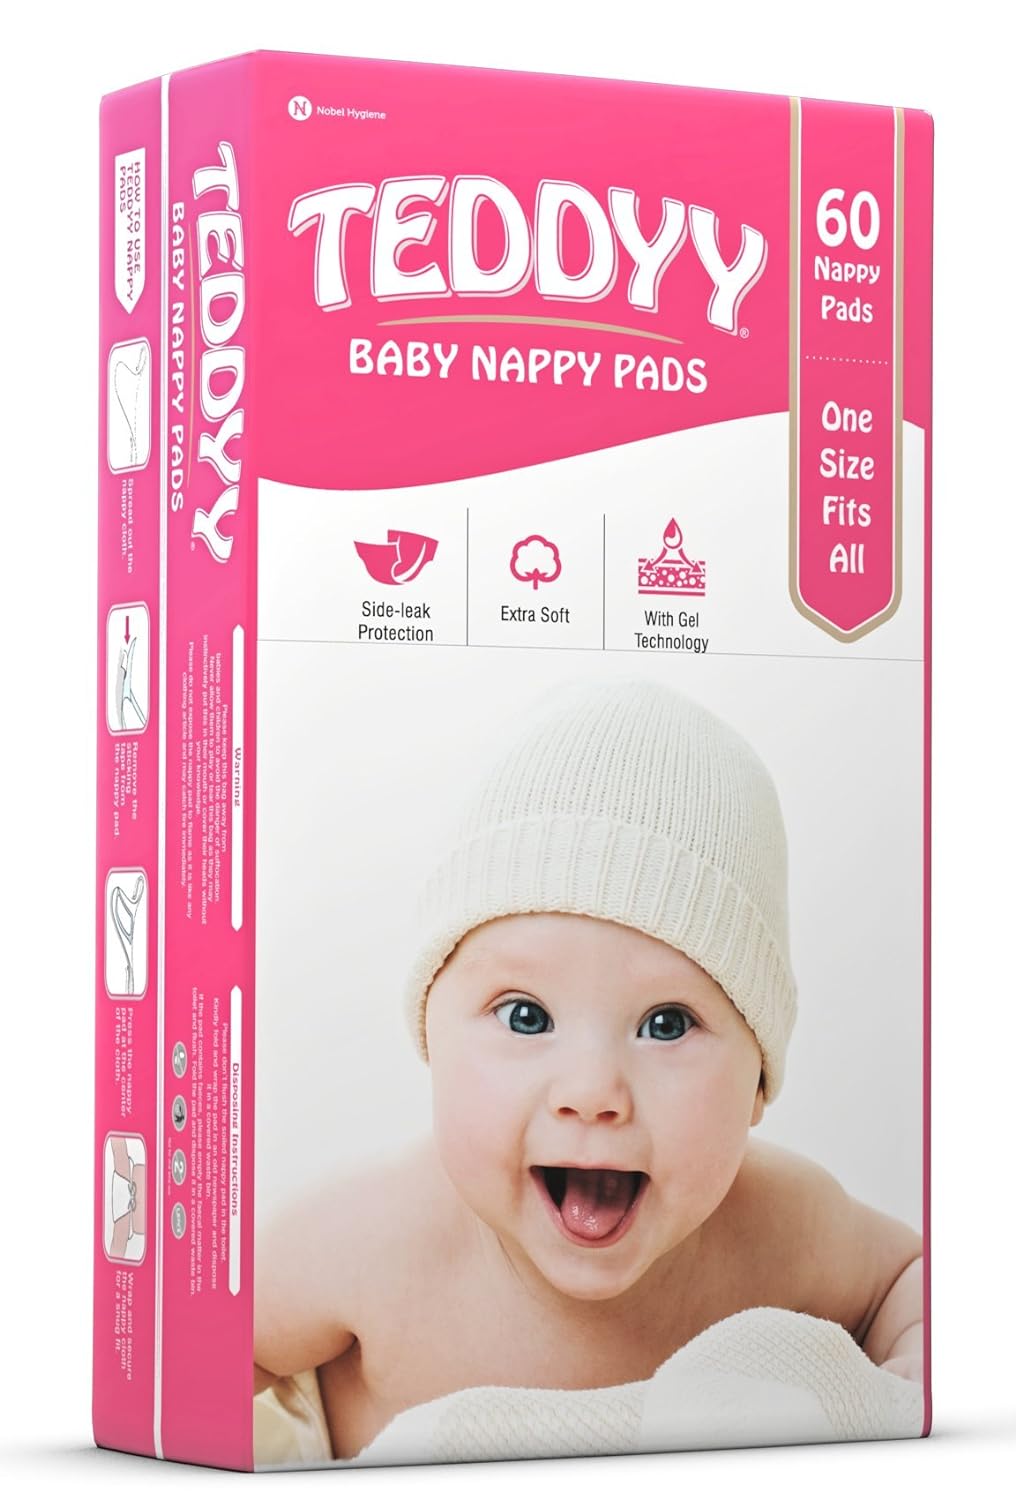 The Ultimate Guide to Keeping Your Baby Comfortable and Dry: Teddyy Baby Nappy Pads